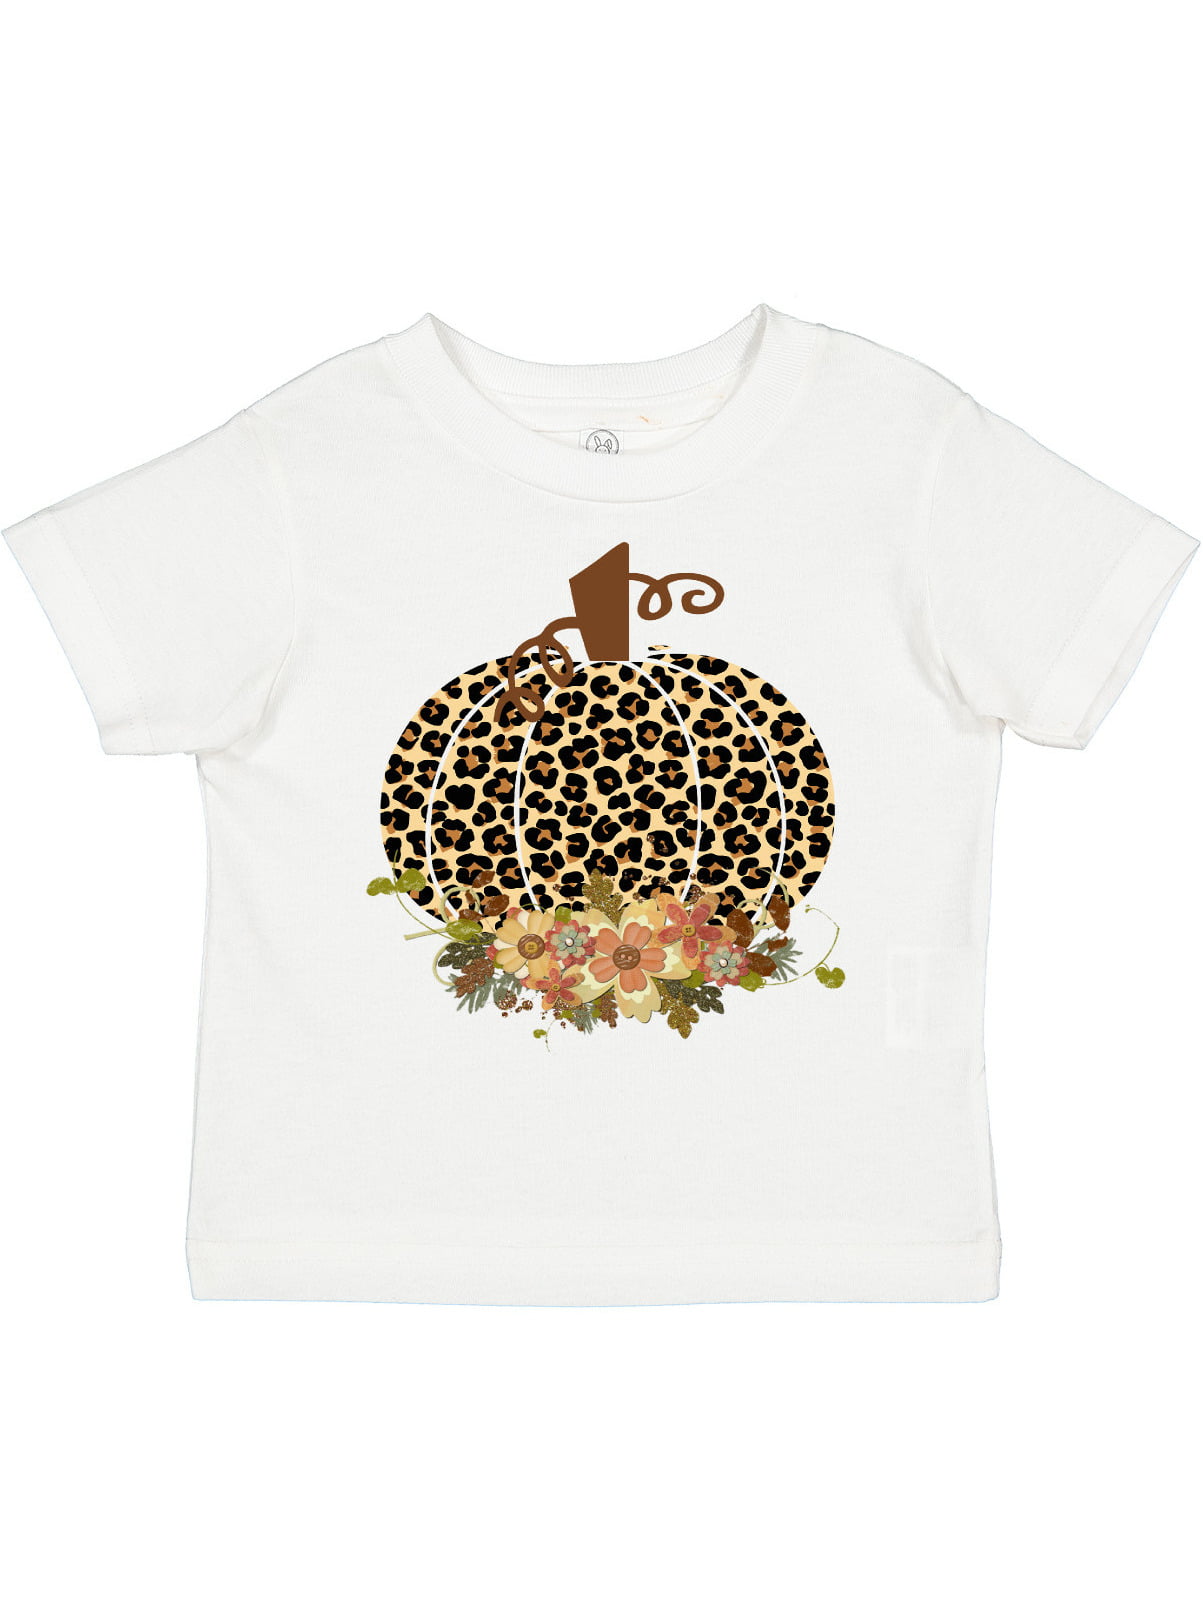 Cute Pink Cheetah Youth Fashion Tops Casual Short Sleeve Print T-Shirts for Boys and Girls